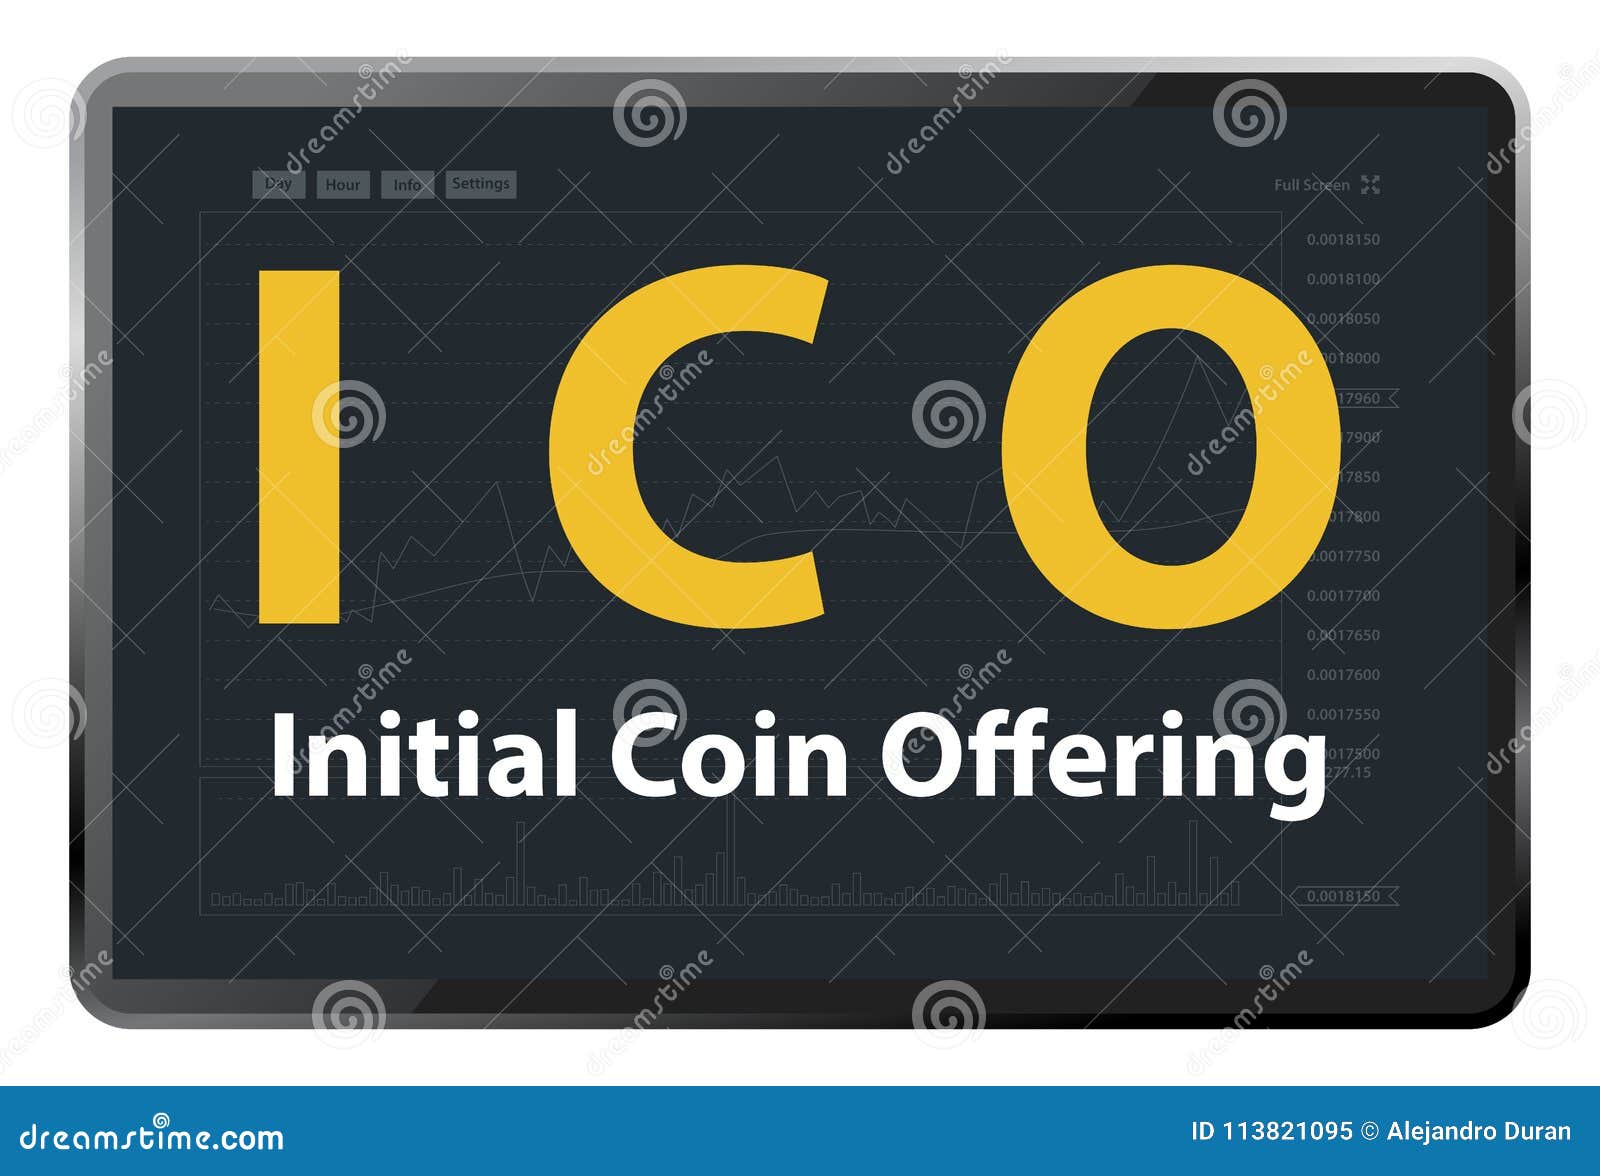 ico initial coin offering